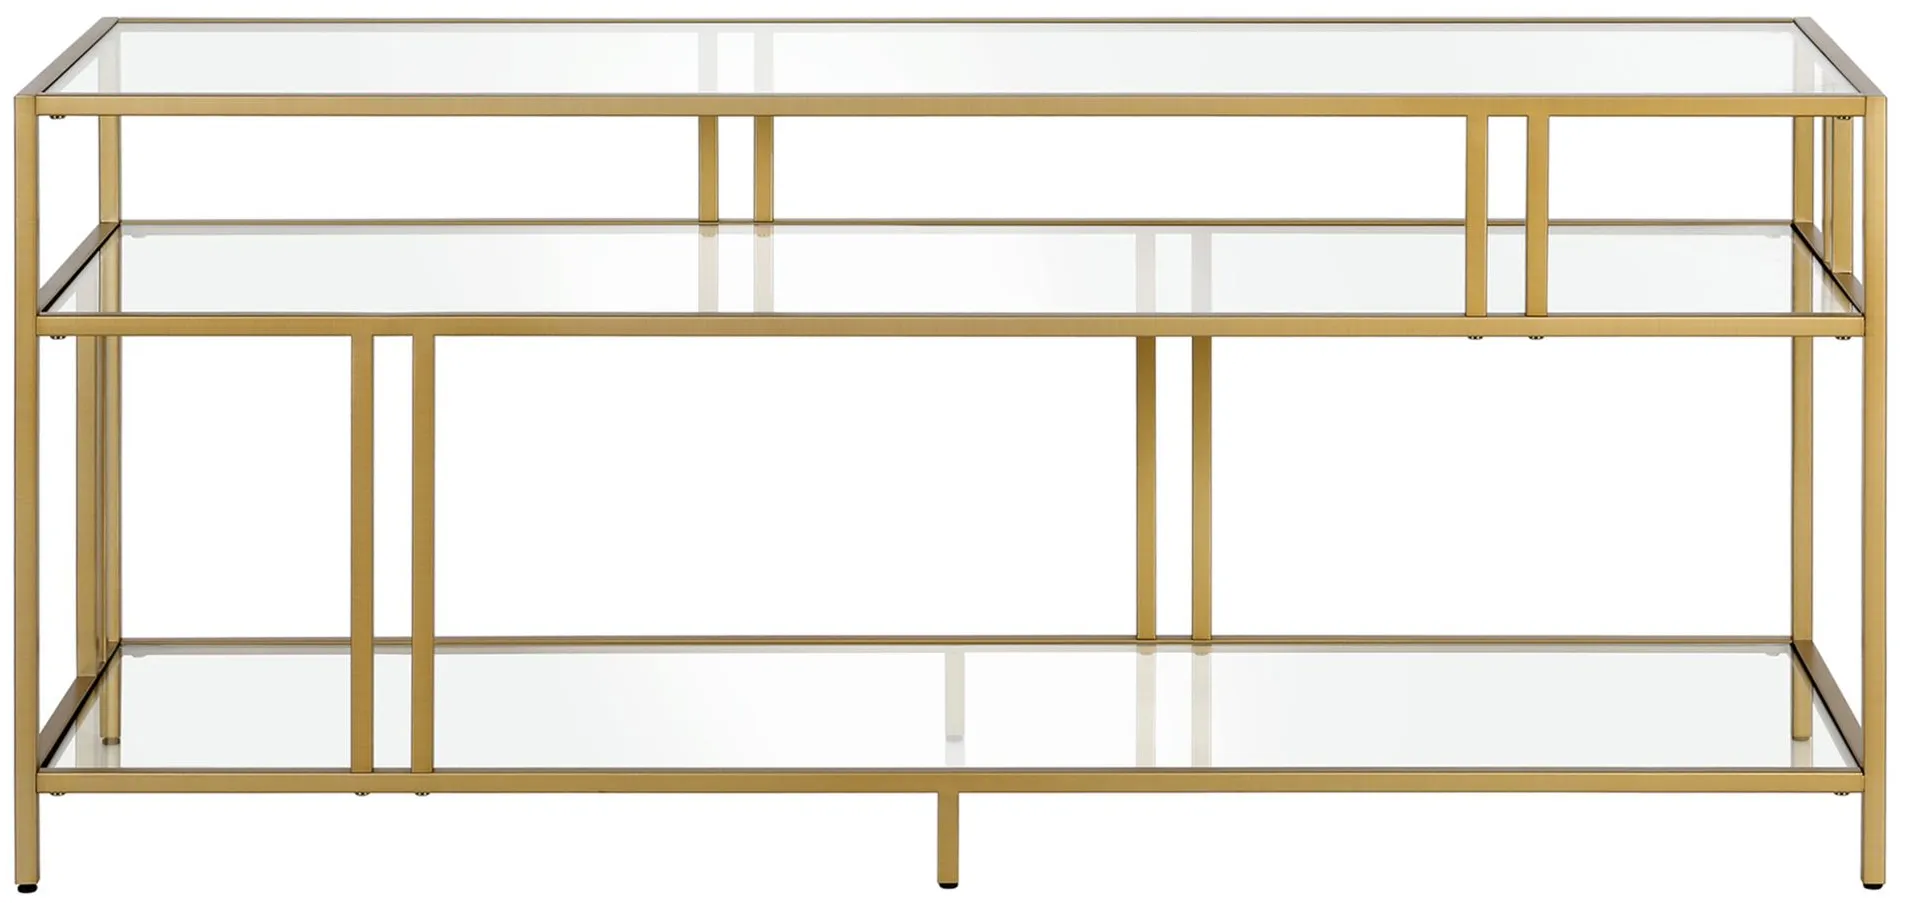 Cortland TV Stand with Glass Shelves in Brass by Hudson & Canal